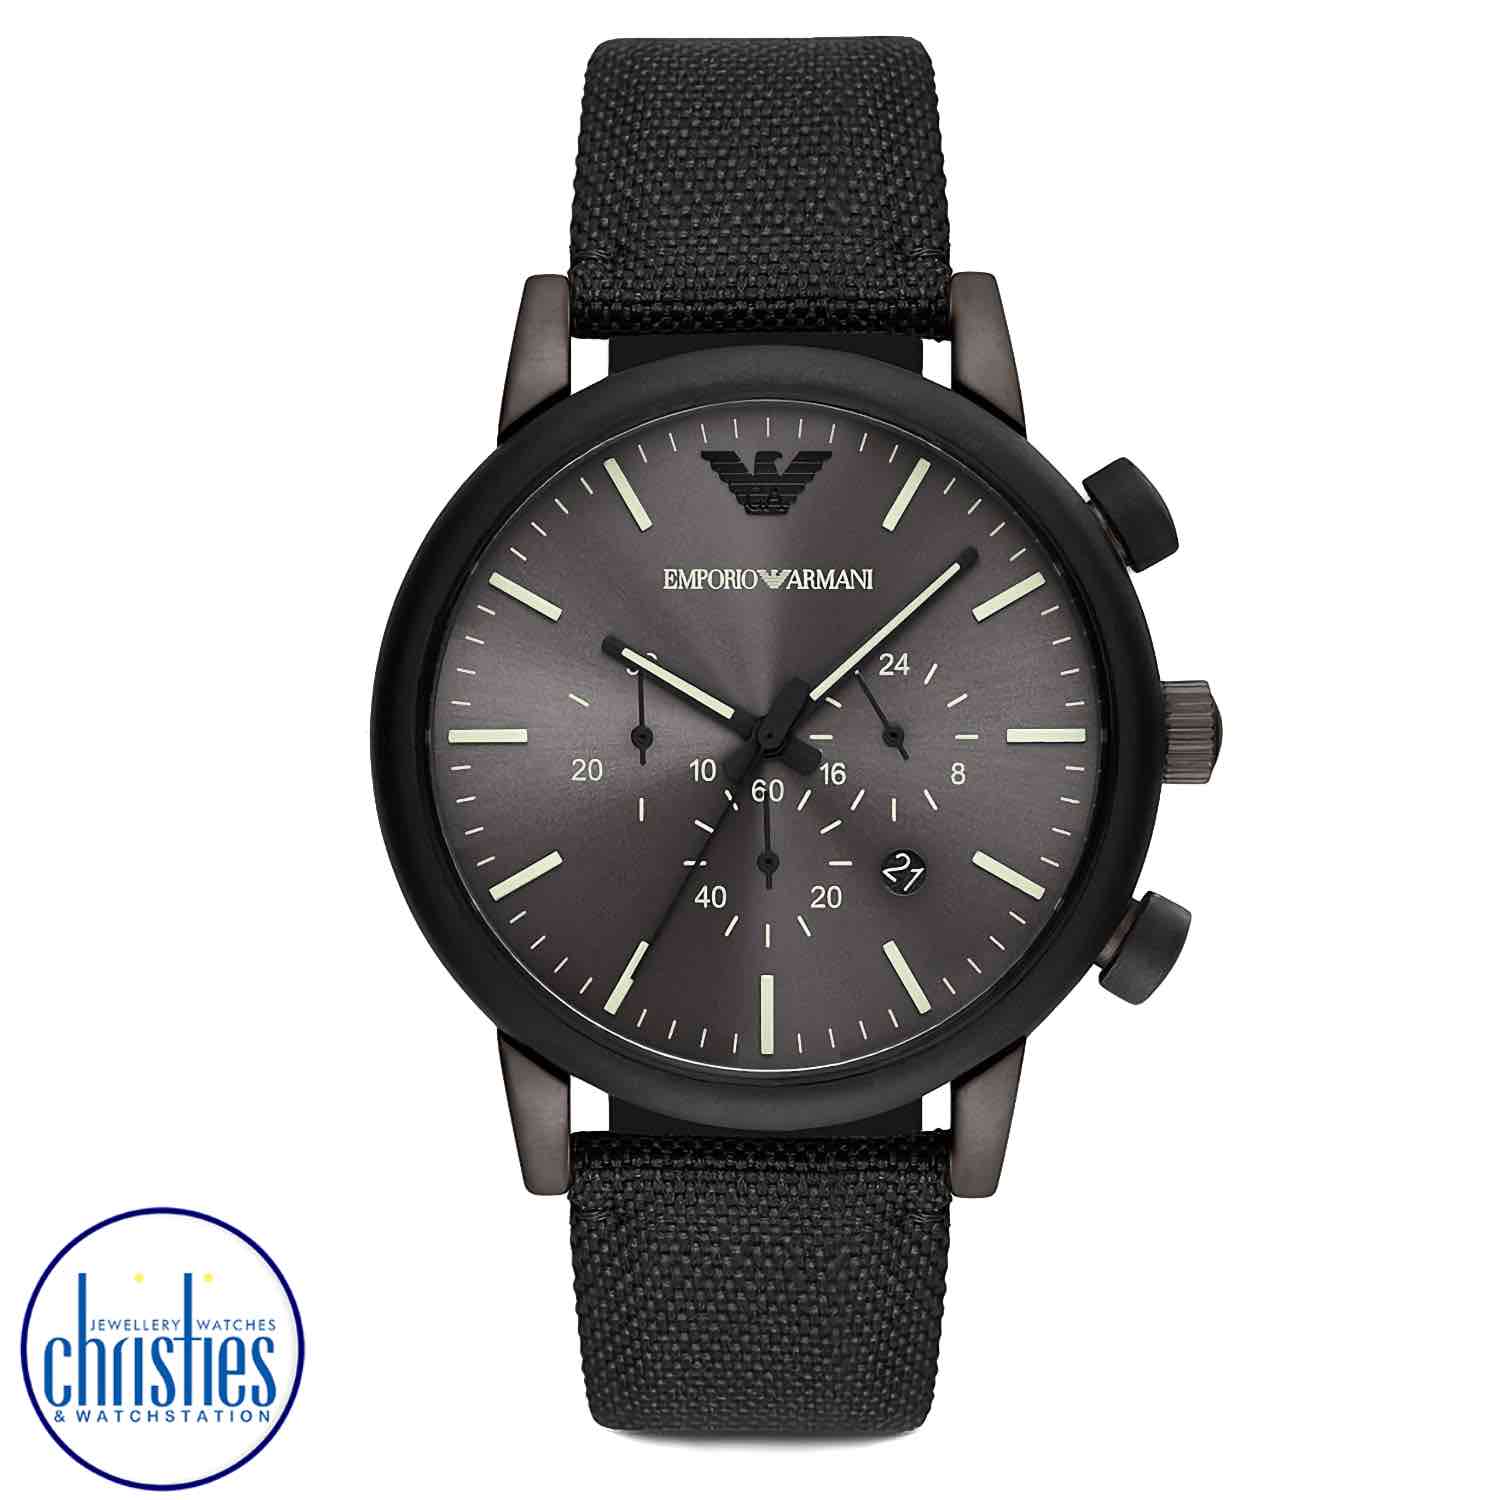 AR11409 Emporio Armani Chronograph Black Fabric Watch. Armani Exchange is a sub-brand to Armani, with focus on the younger generation.